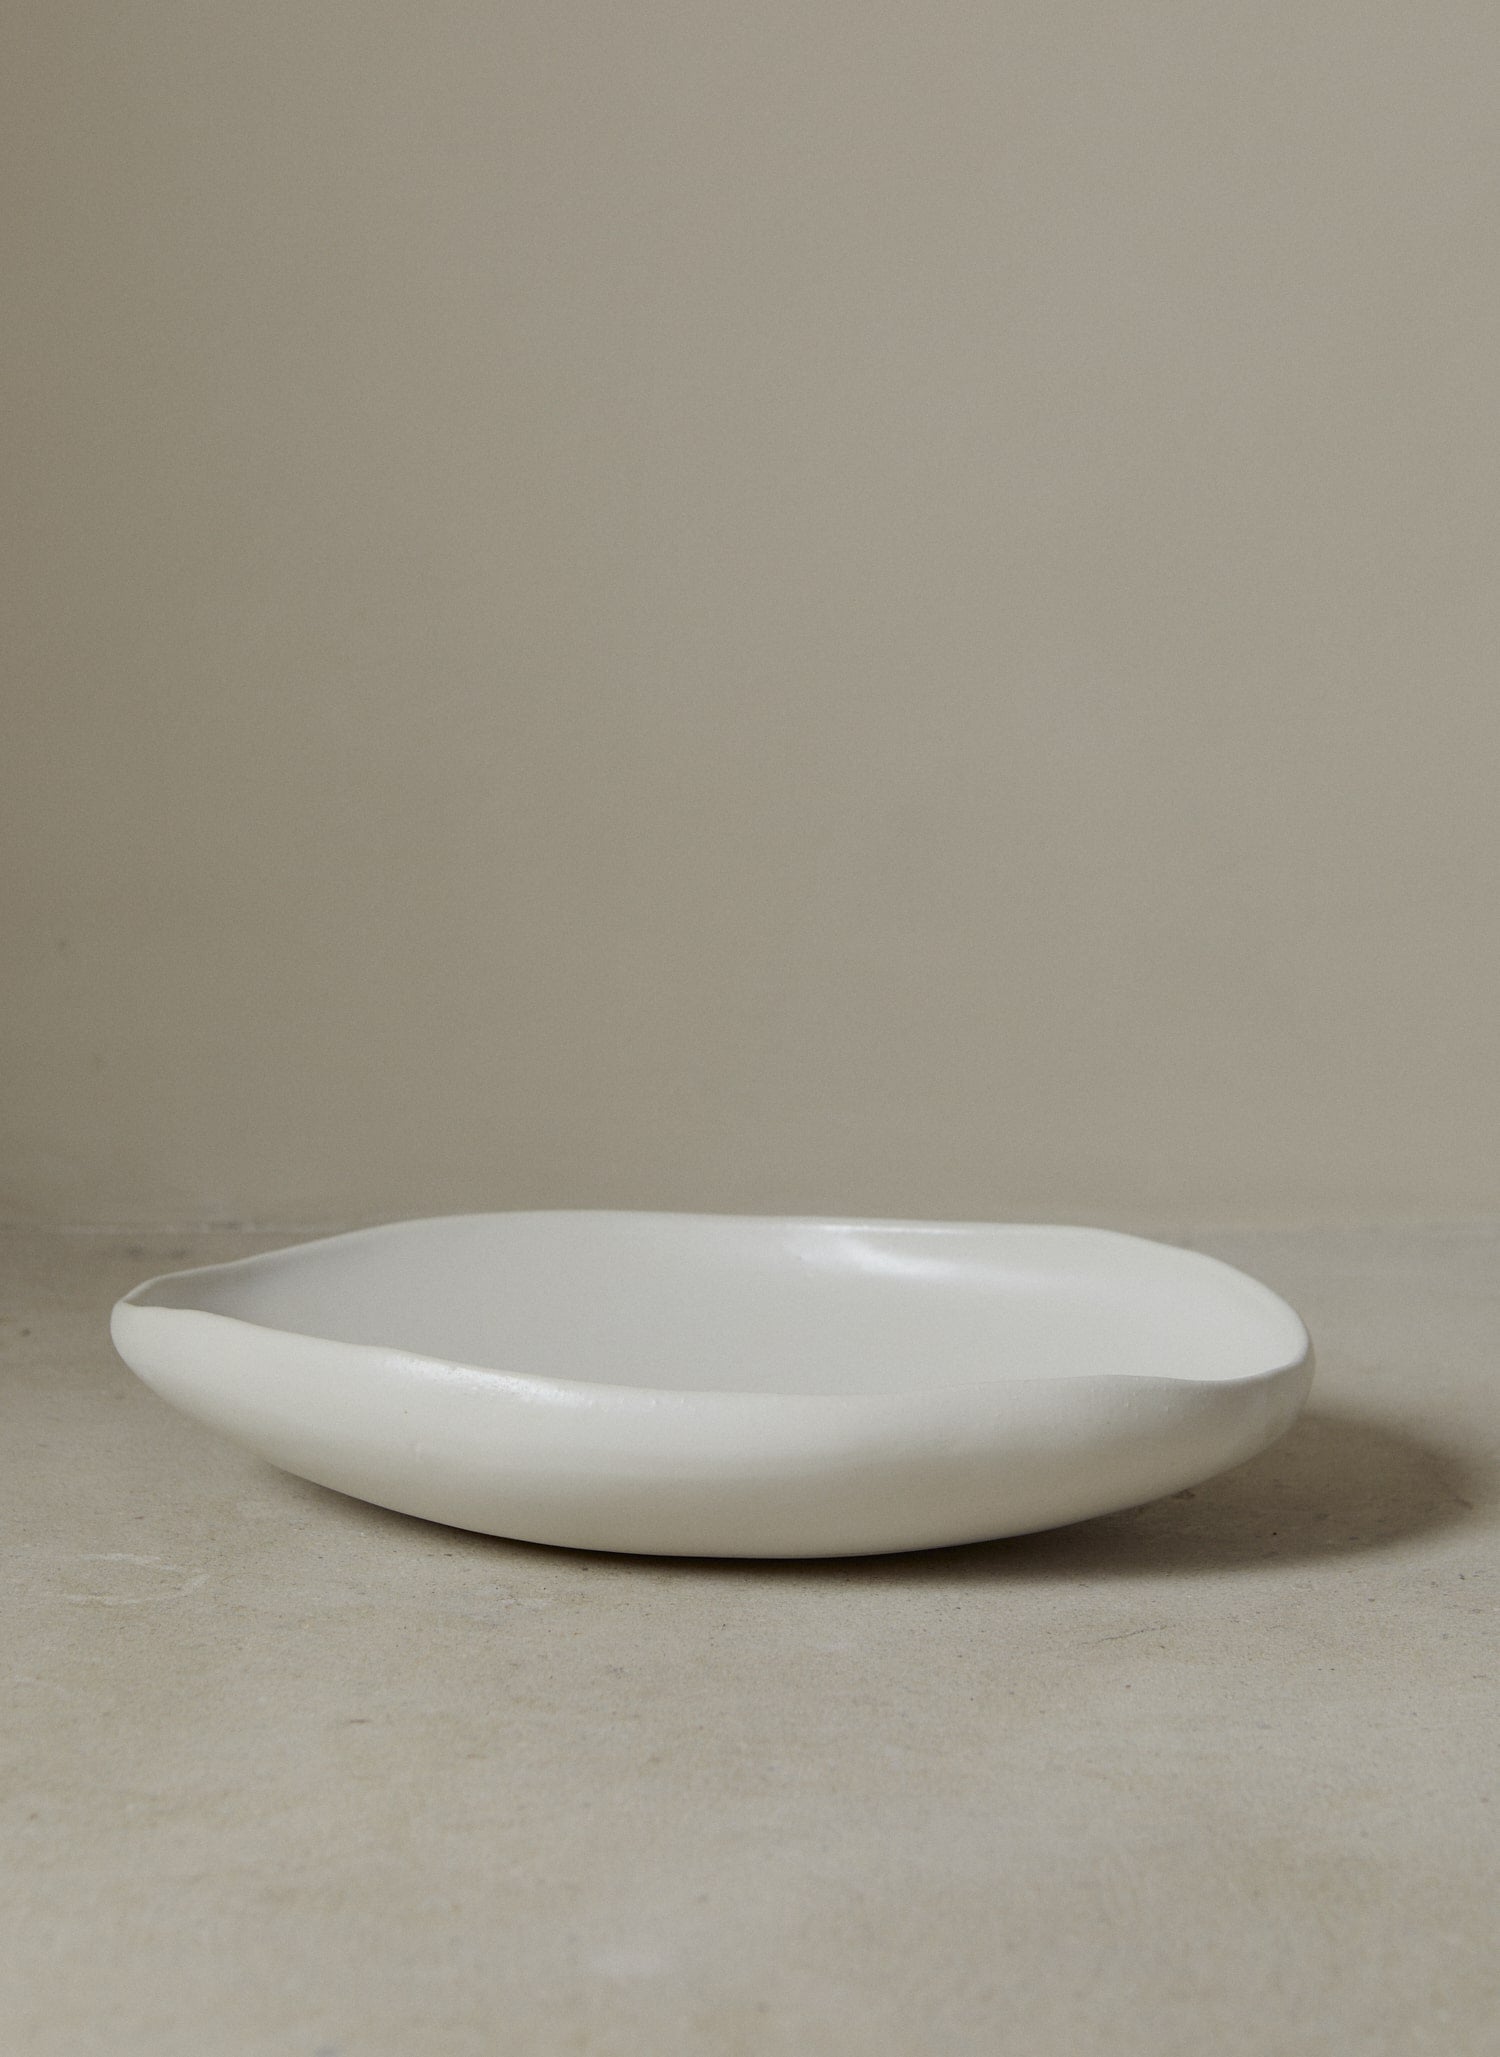 Large, oblong handmade serving bowl perfect for entertaining and everyday use in classic matte white stoneware. 